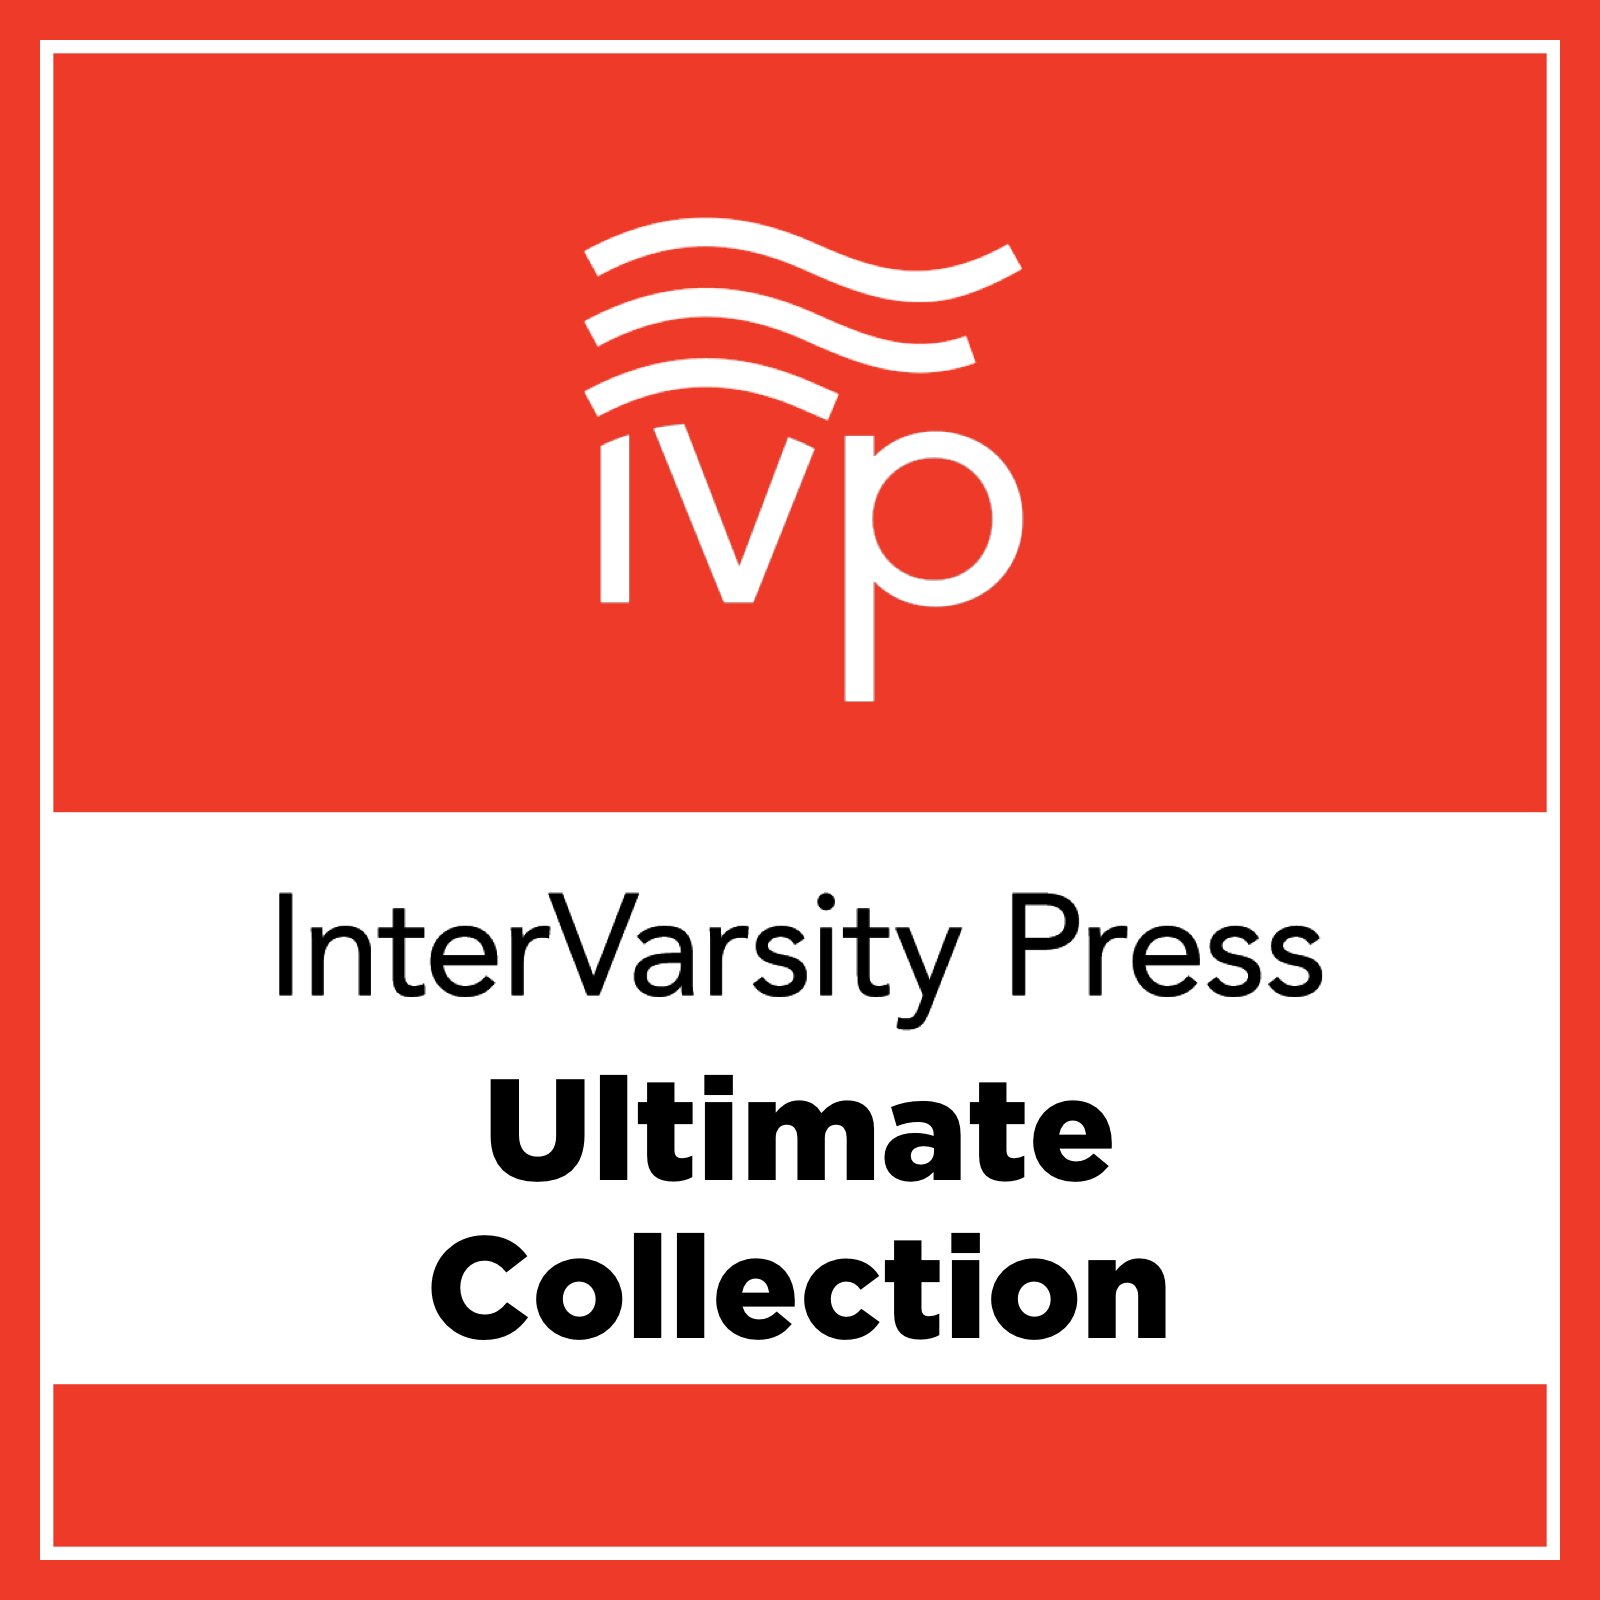 InterVarsity Press Ultimate Collection (753 Resources)